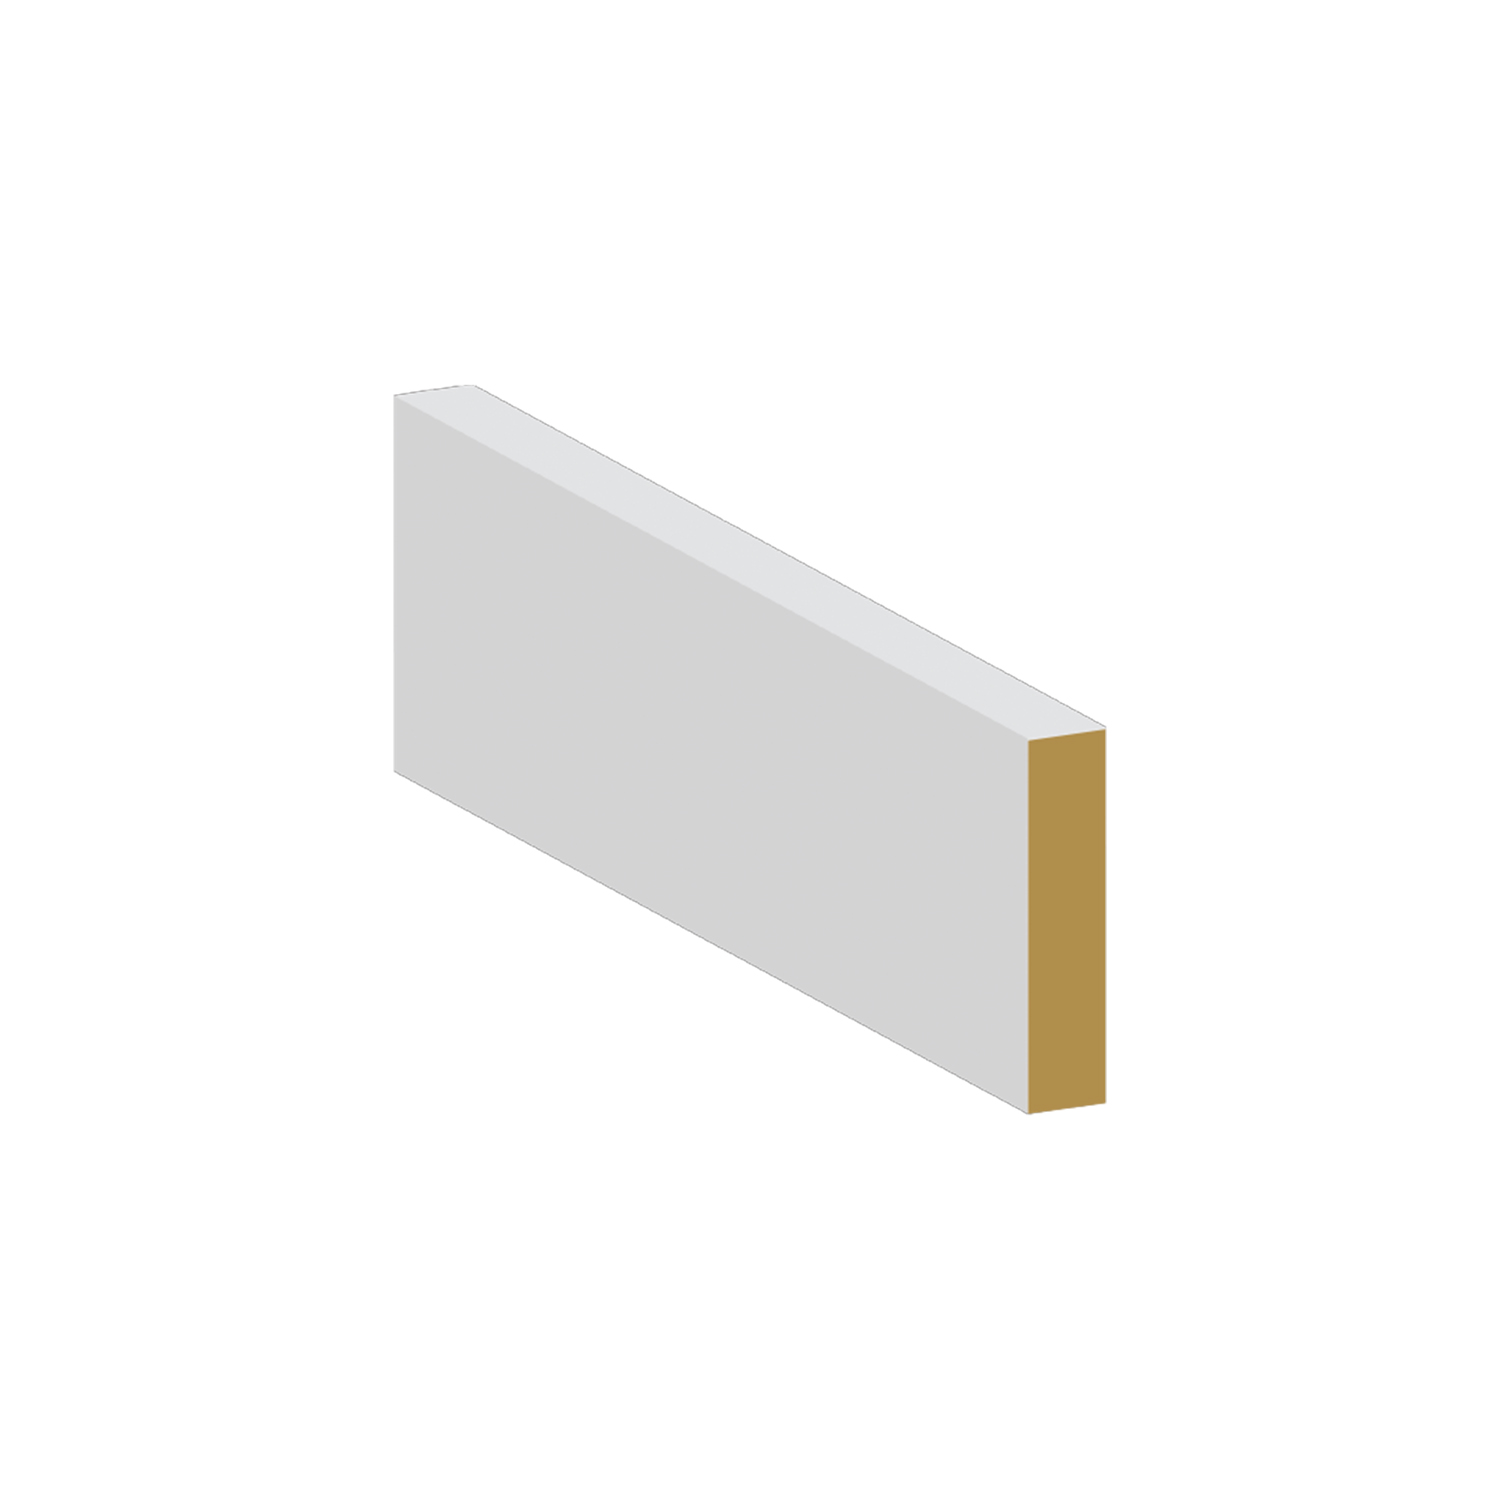 Casing MDF Eased Edge 2 3/4 x 3/4 x 8' - $1.06/LF - SOLD PER PIECE - EACH PIECE IS 8' - $8.50 EACH